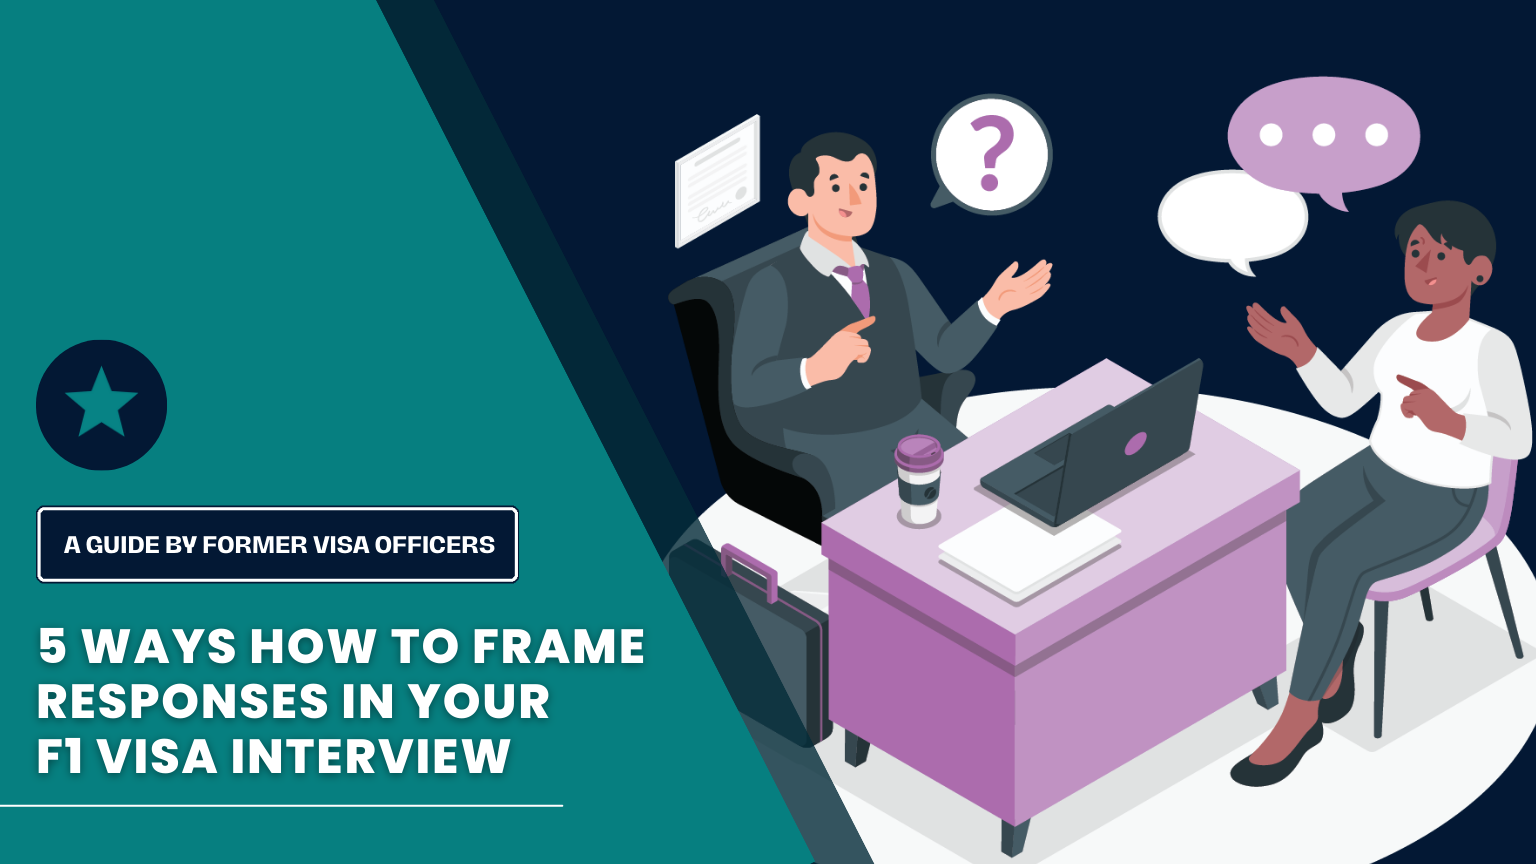 How to Frame Responses in Your F1 Visa Interview